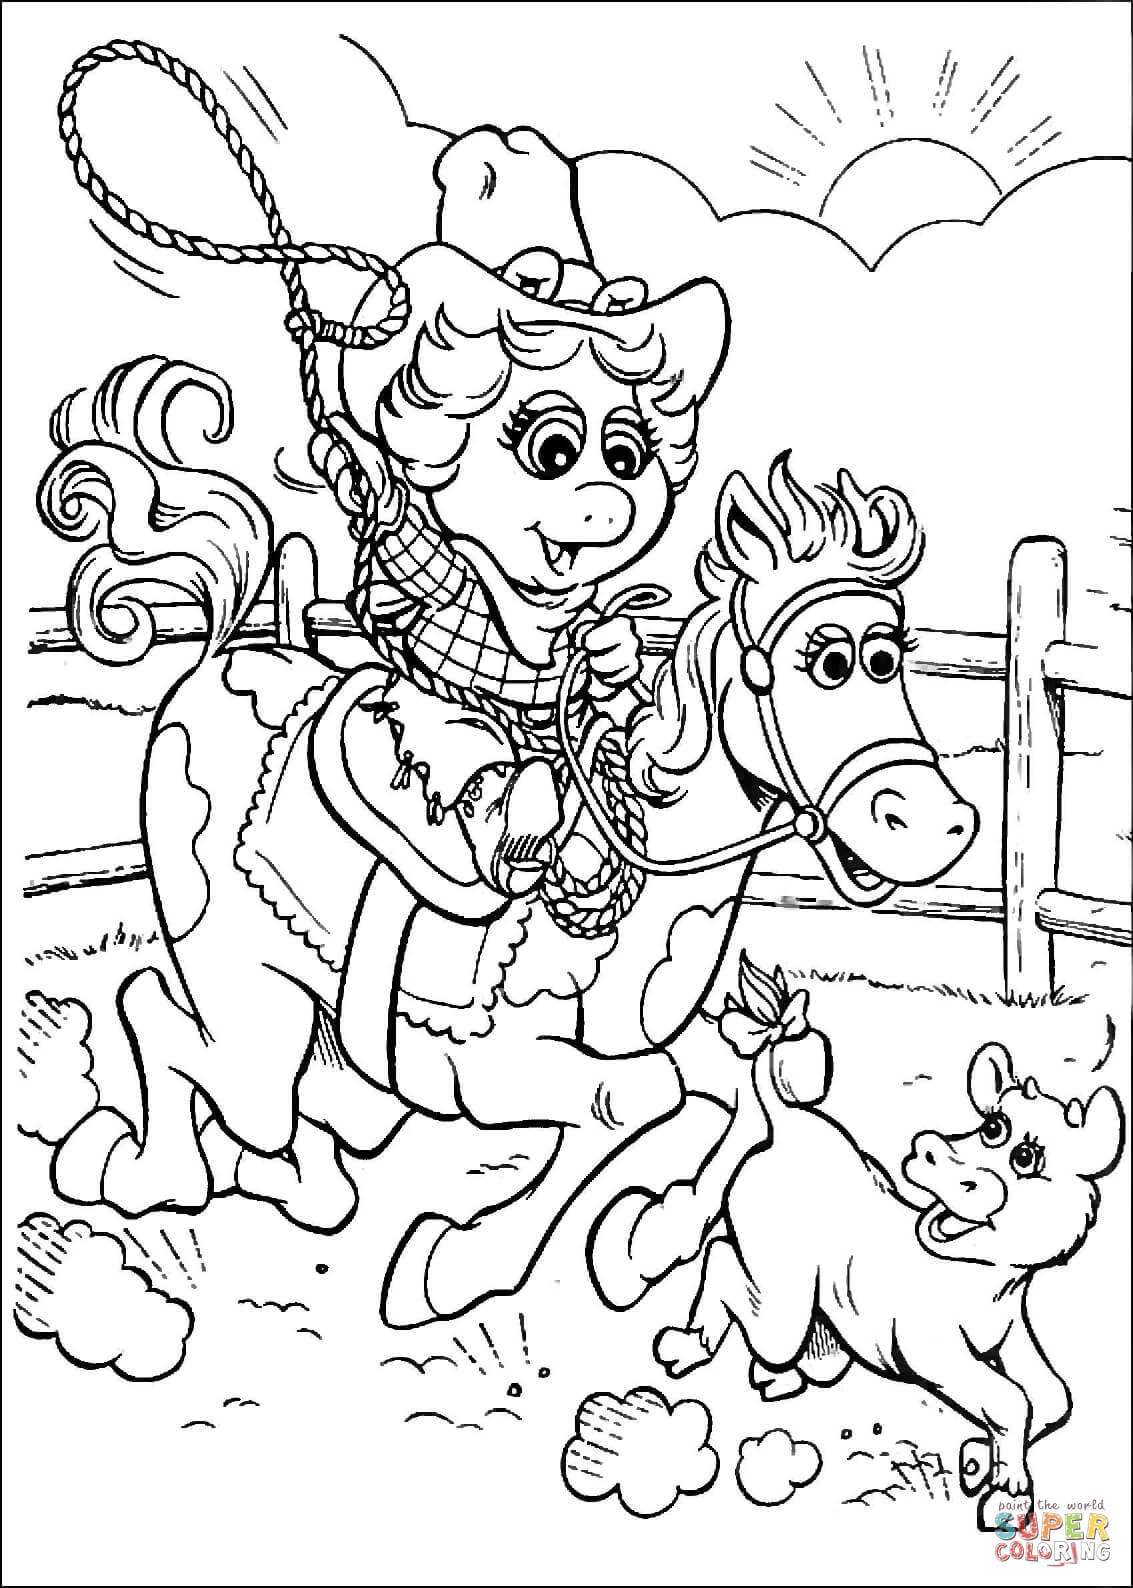 Baby Cowgirl Coloring Pages - Ð¡oloring Pages For All Ages